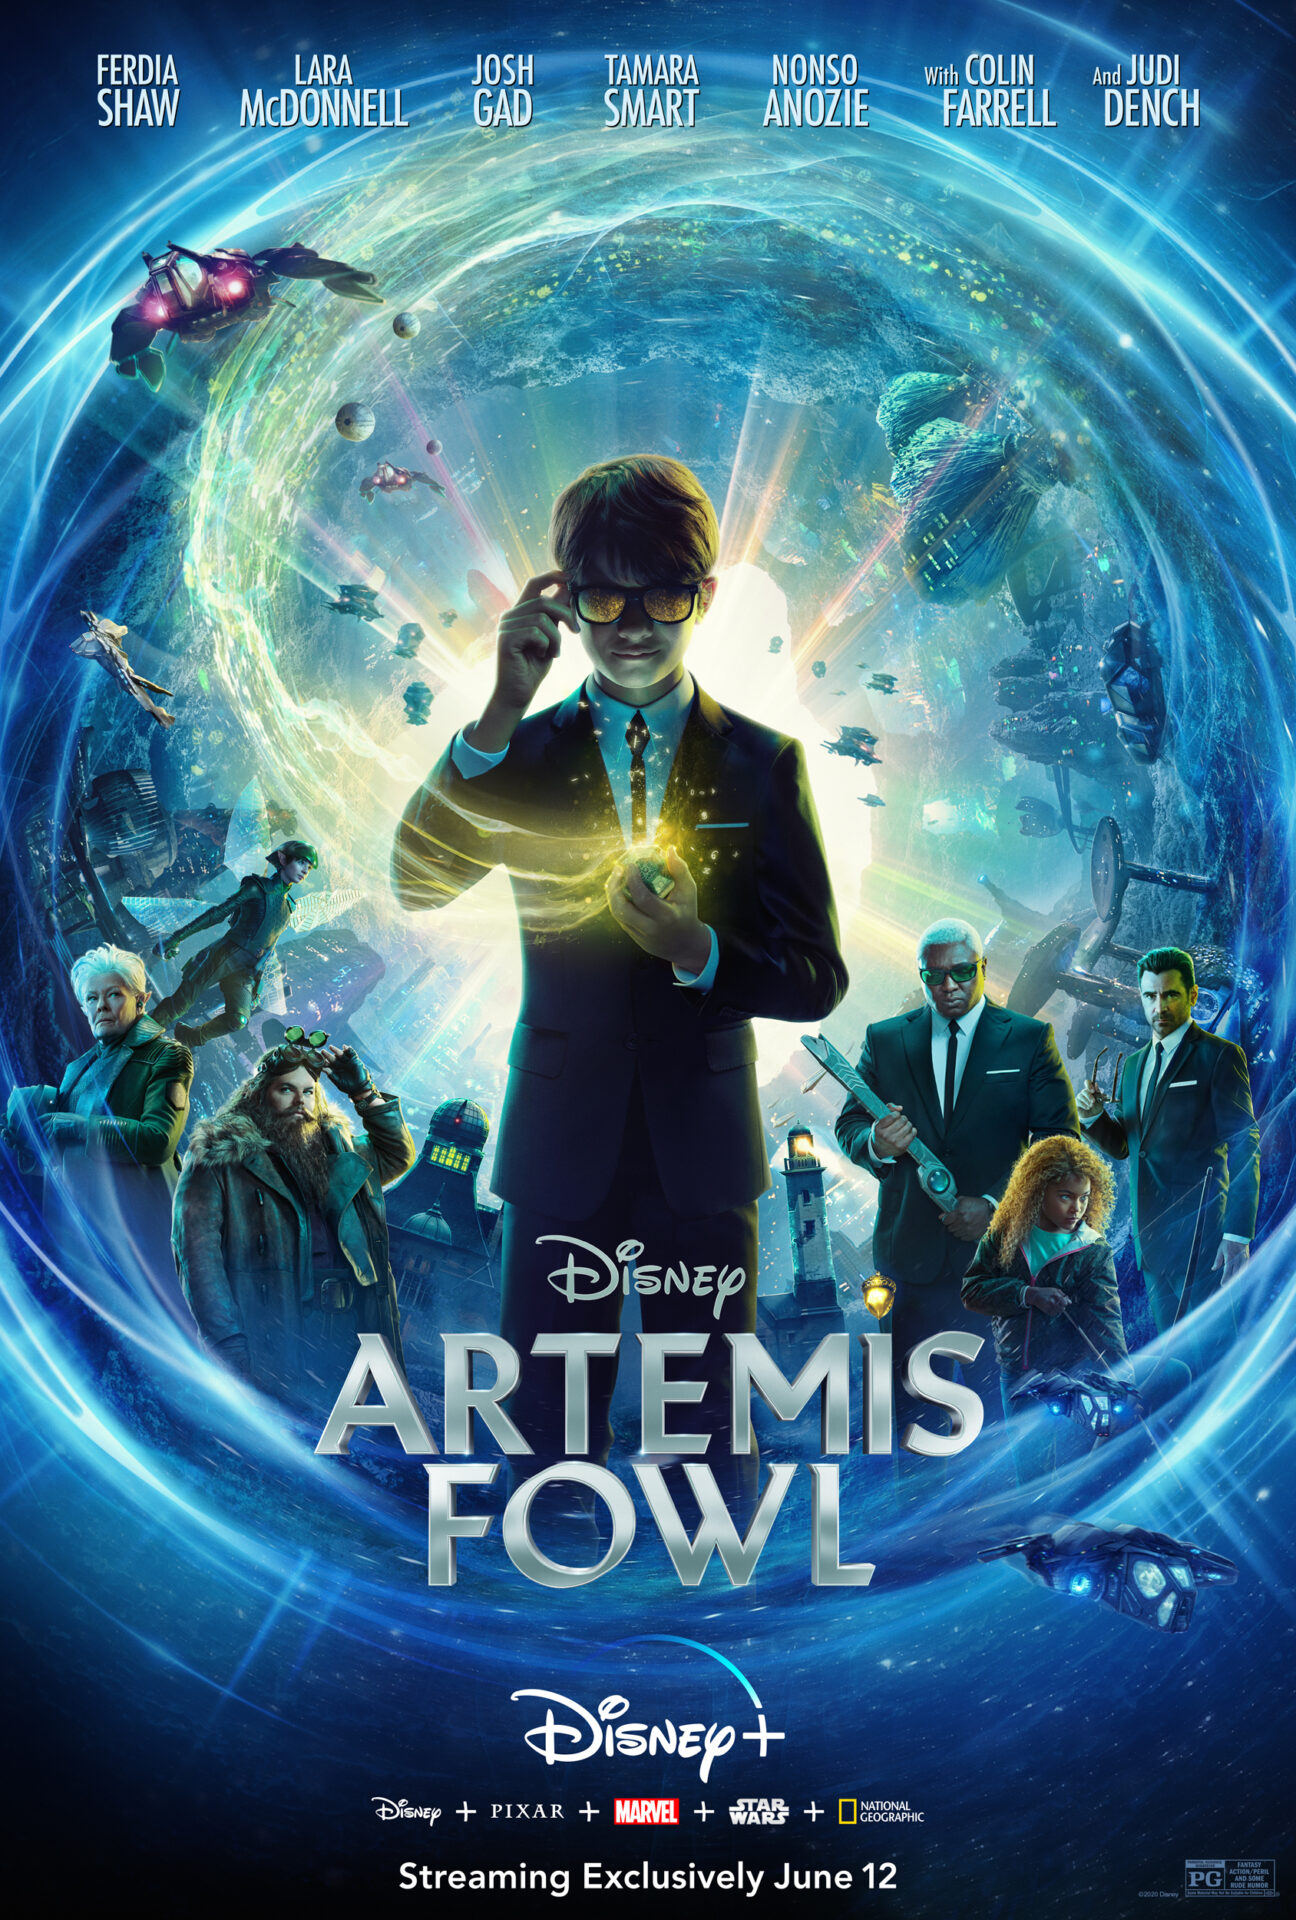 Will Artemis Fowl be worth your time?